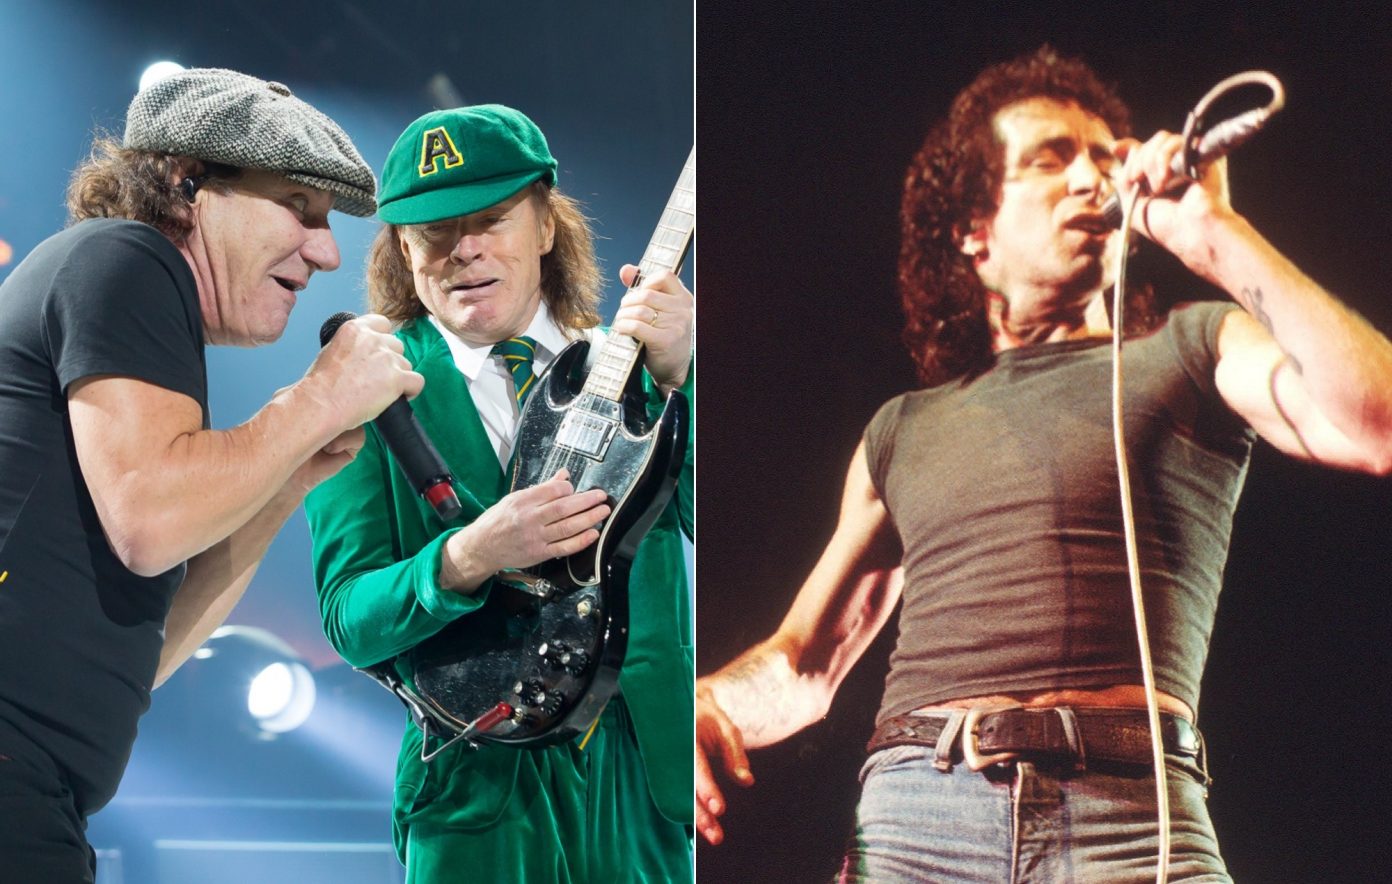 NME: AC/DC’s Angus Young says Bon Scott thought Brian Johnson was “incredible”